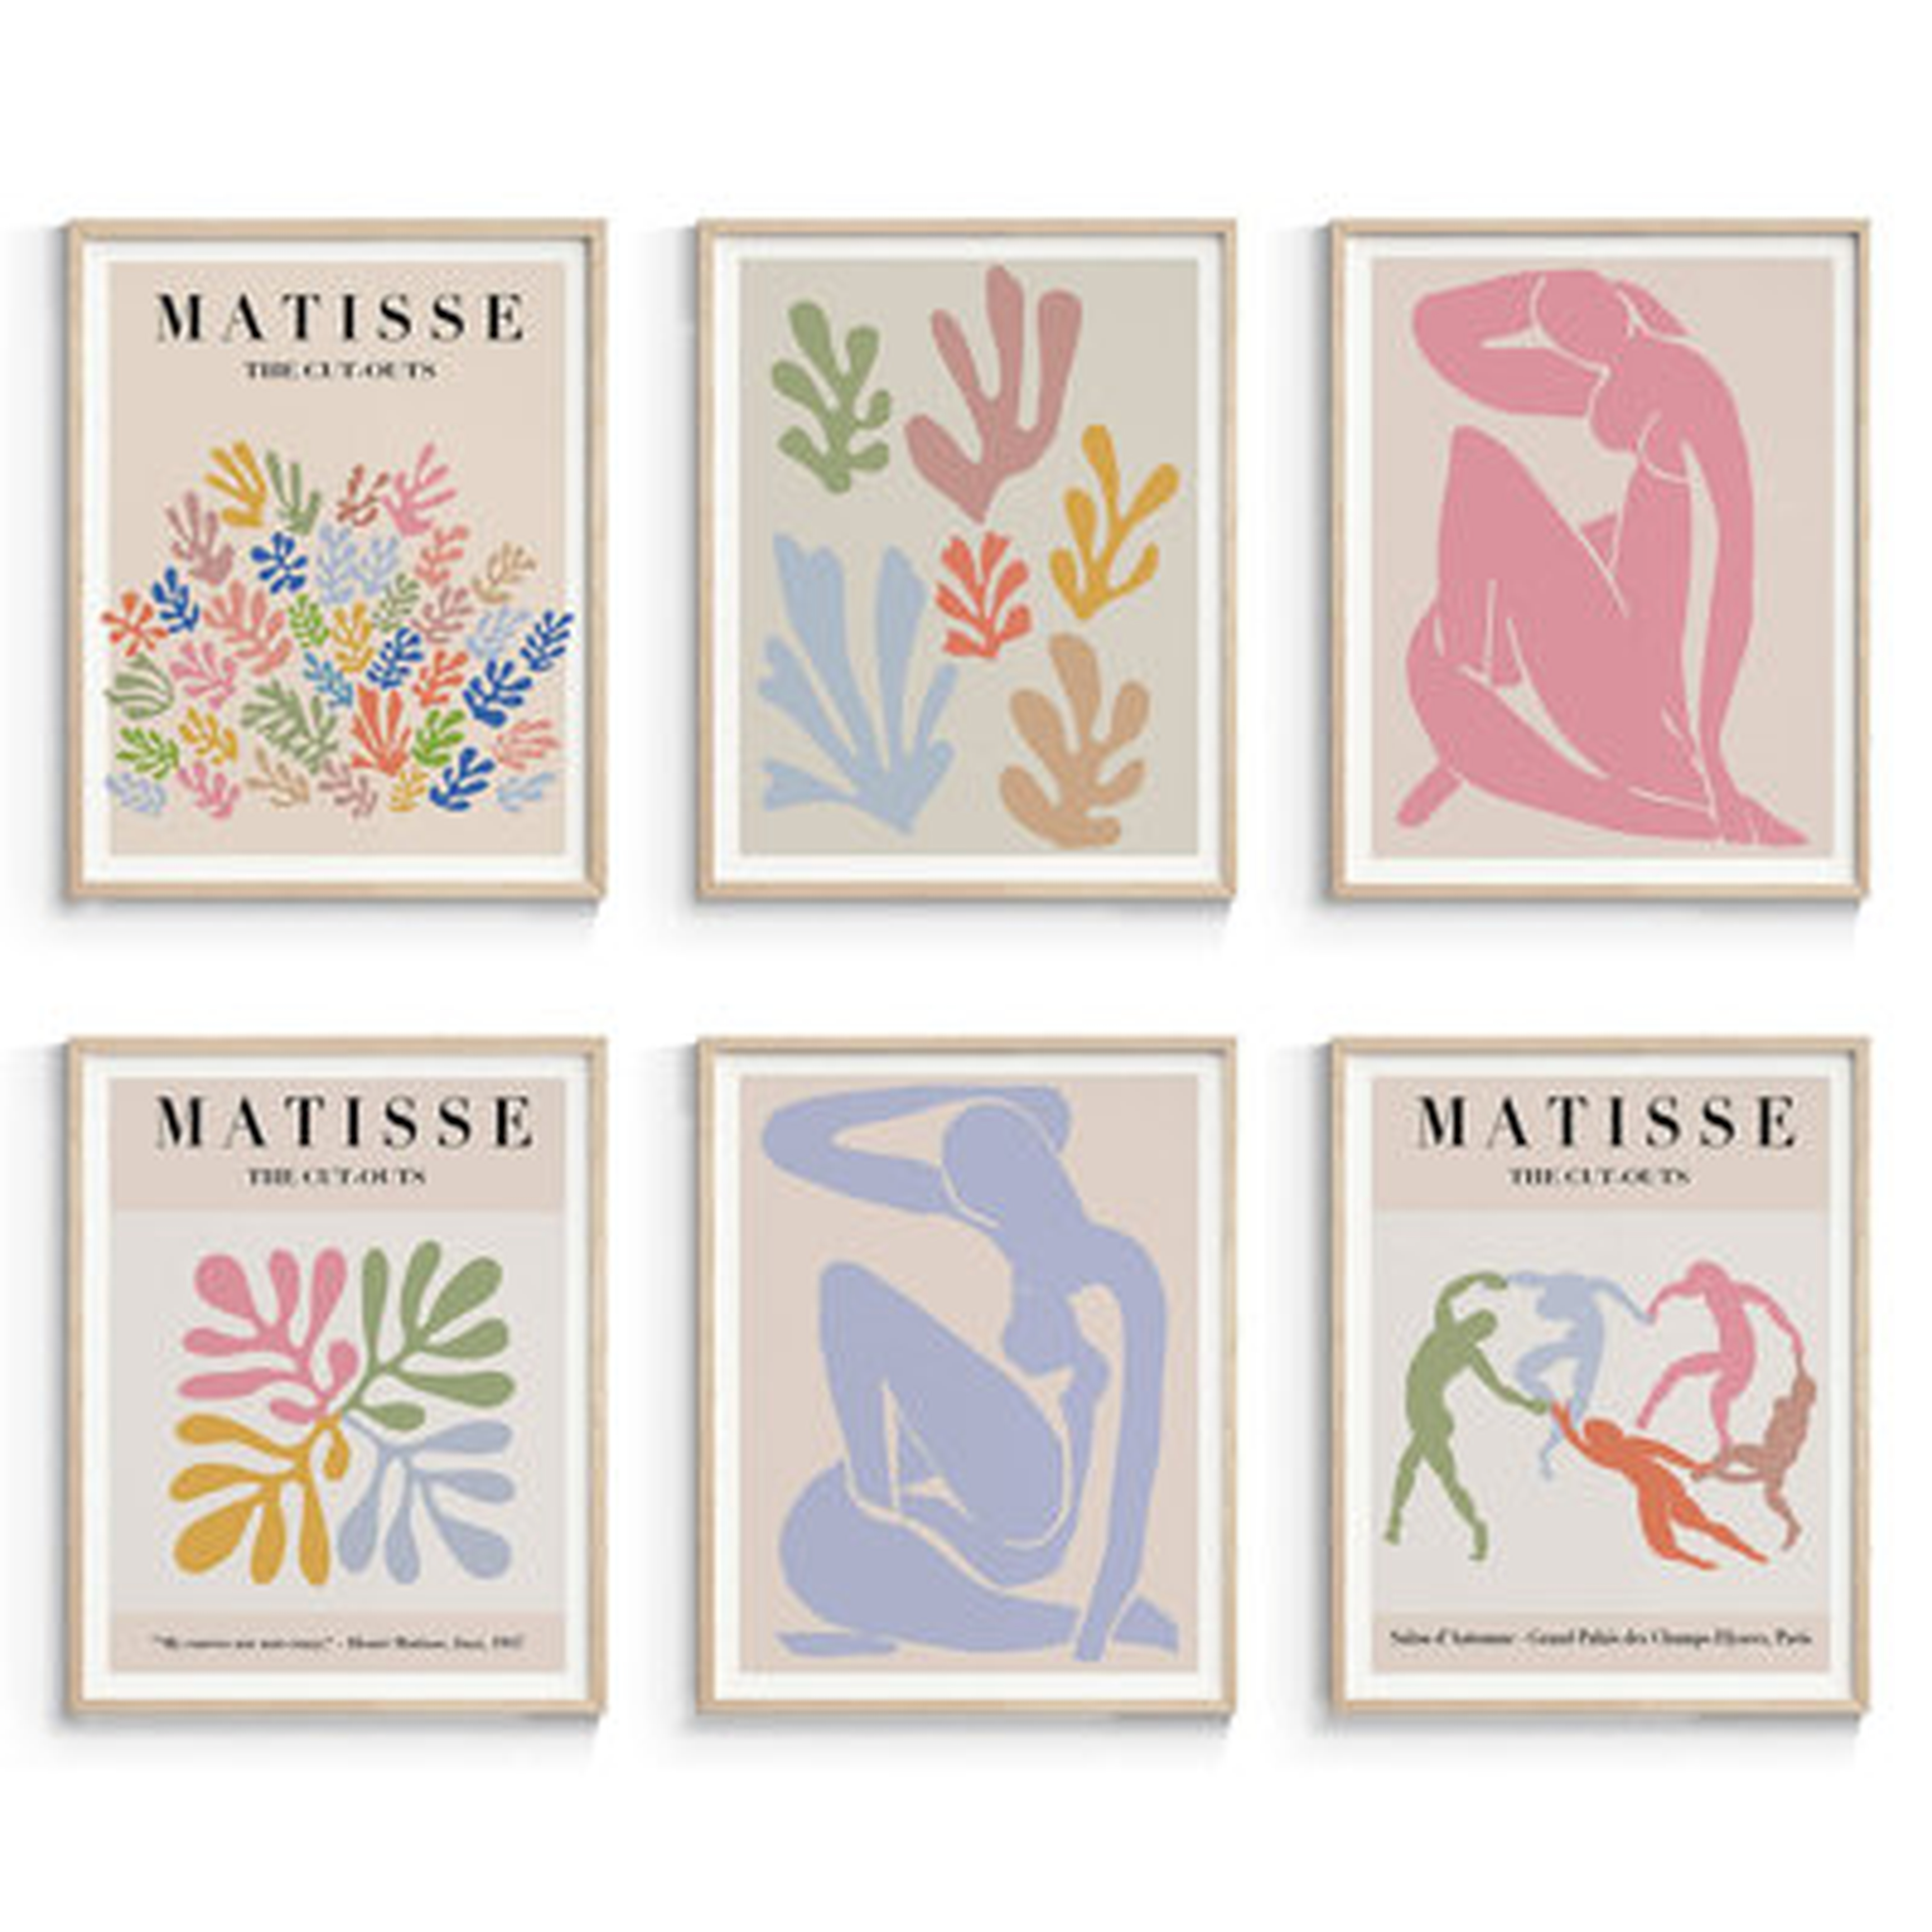 Insimsea Matisse Wall Art Exhibition Poster & Prints, Henri Matisse Posters For Room Aesthetic, Abstract Wall Art For Living Room UNFRAMED, Set Of 6 (11X14 In) - Wayfair